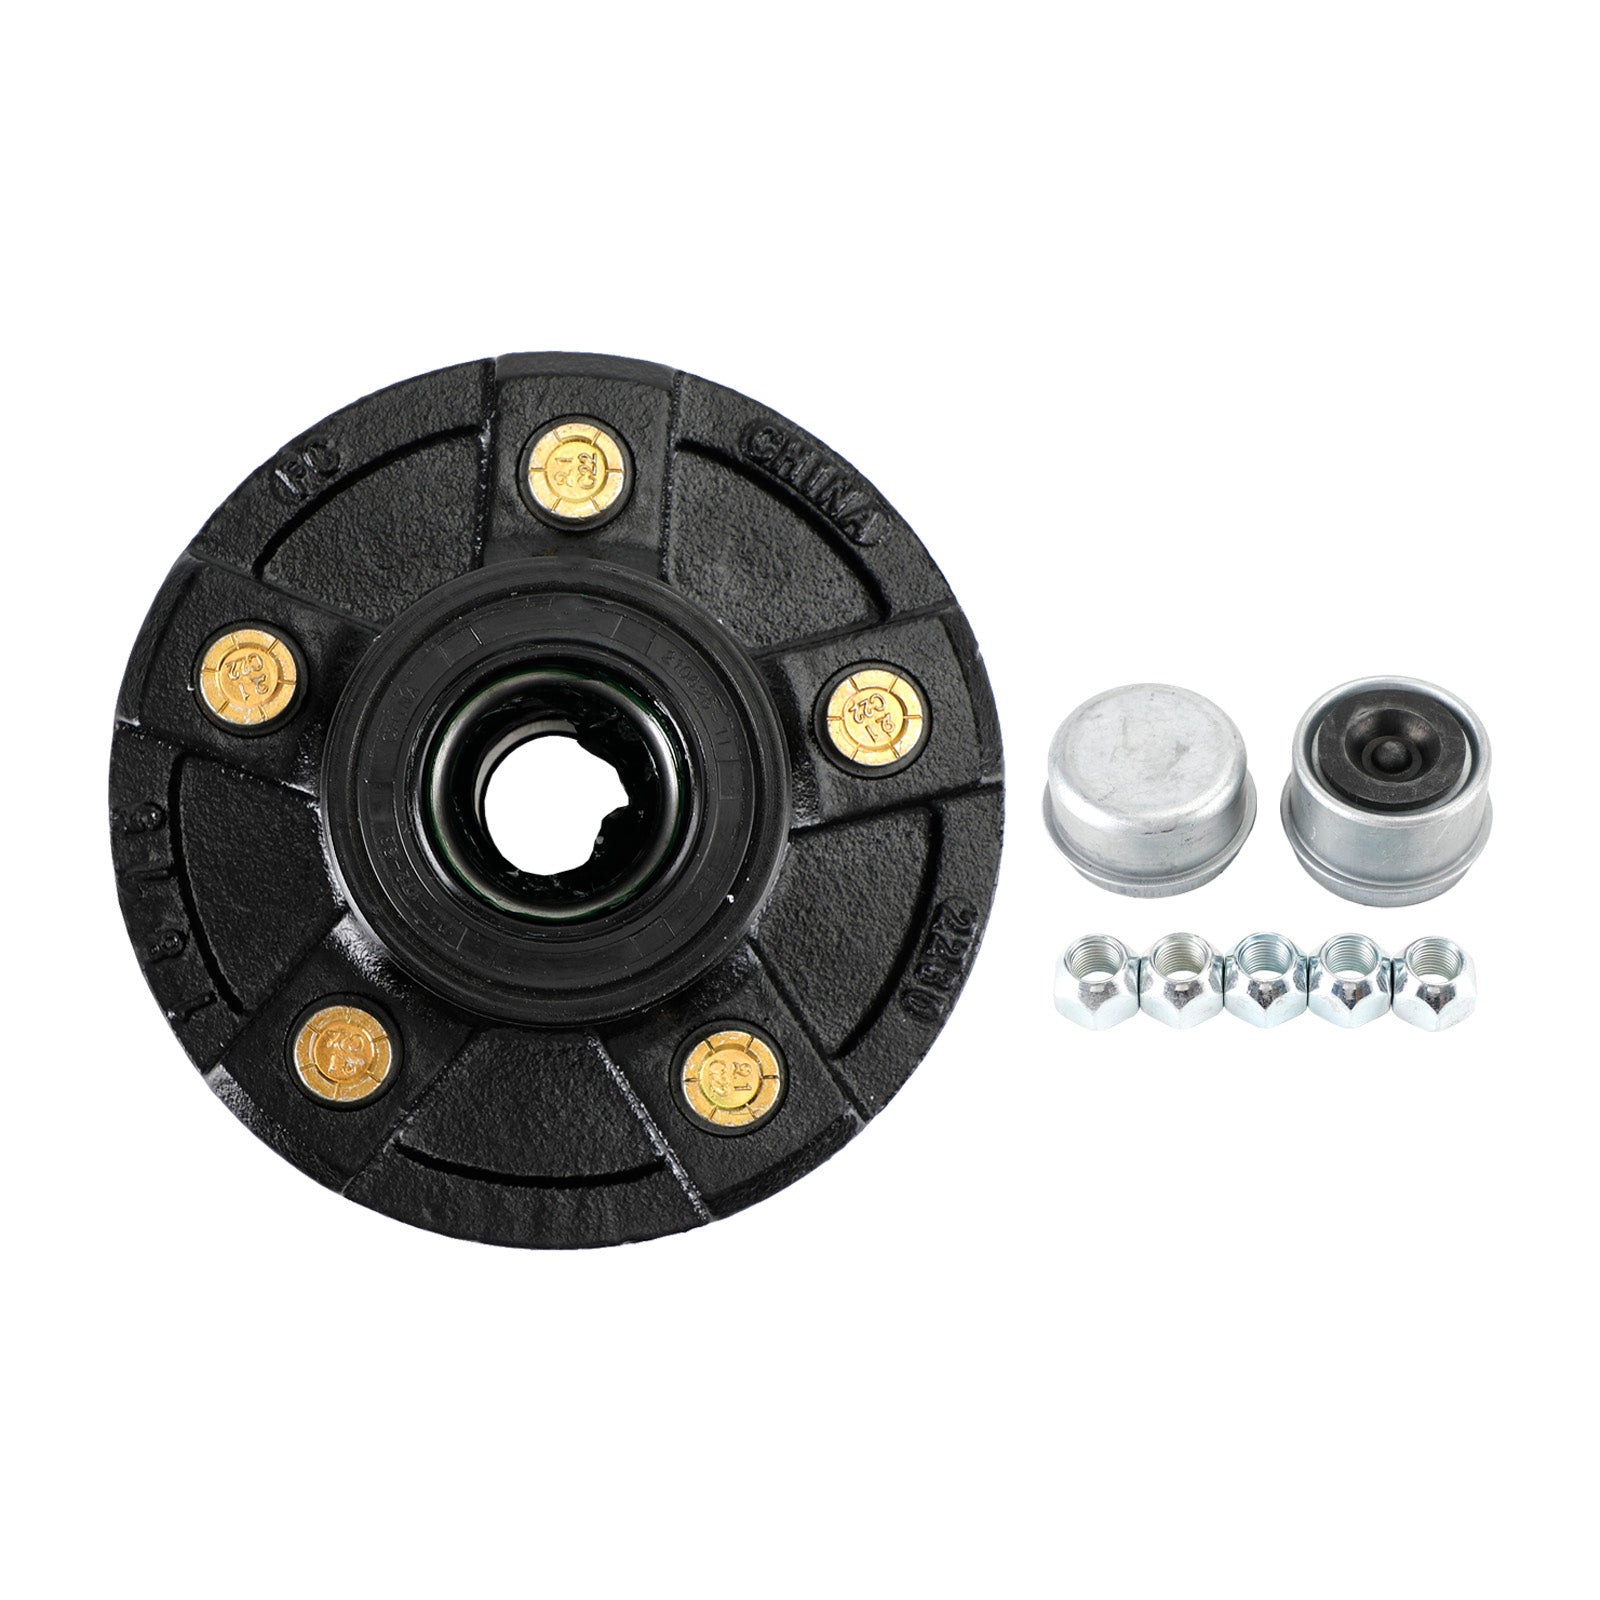 Grease Trailer Idler Hub Assembly for 3.5K Axles - 5 on 4-1/2 - Pre-Greased